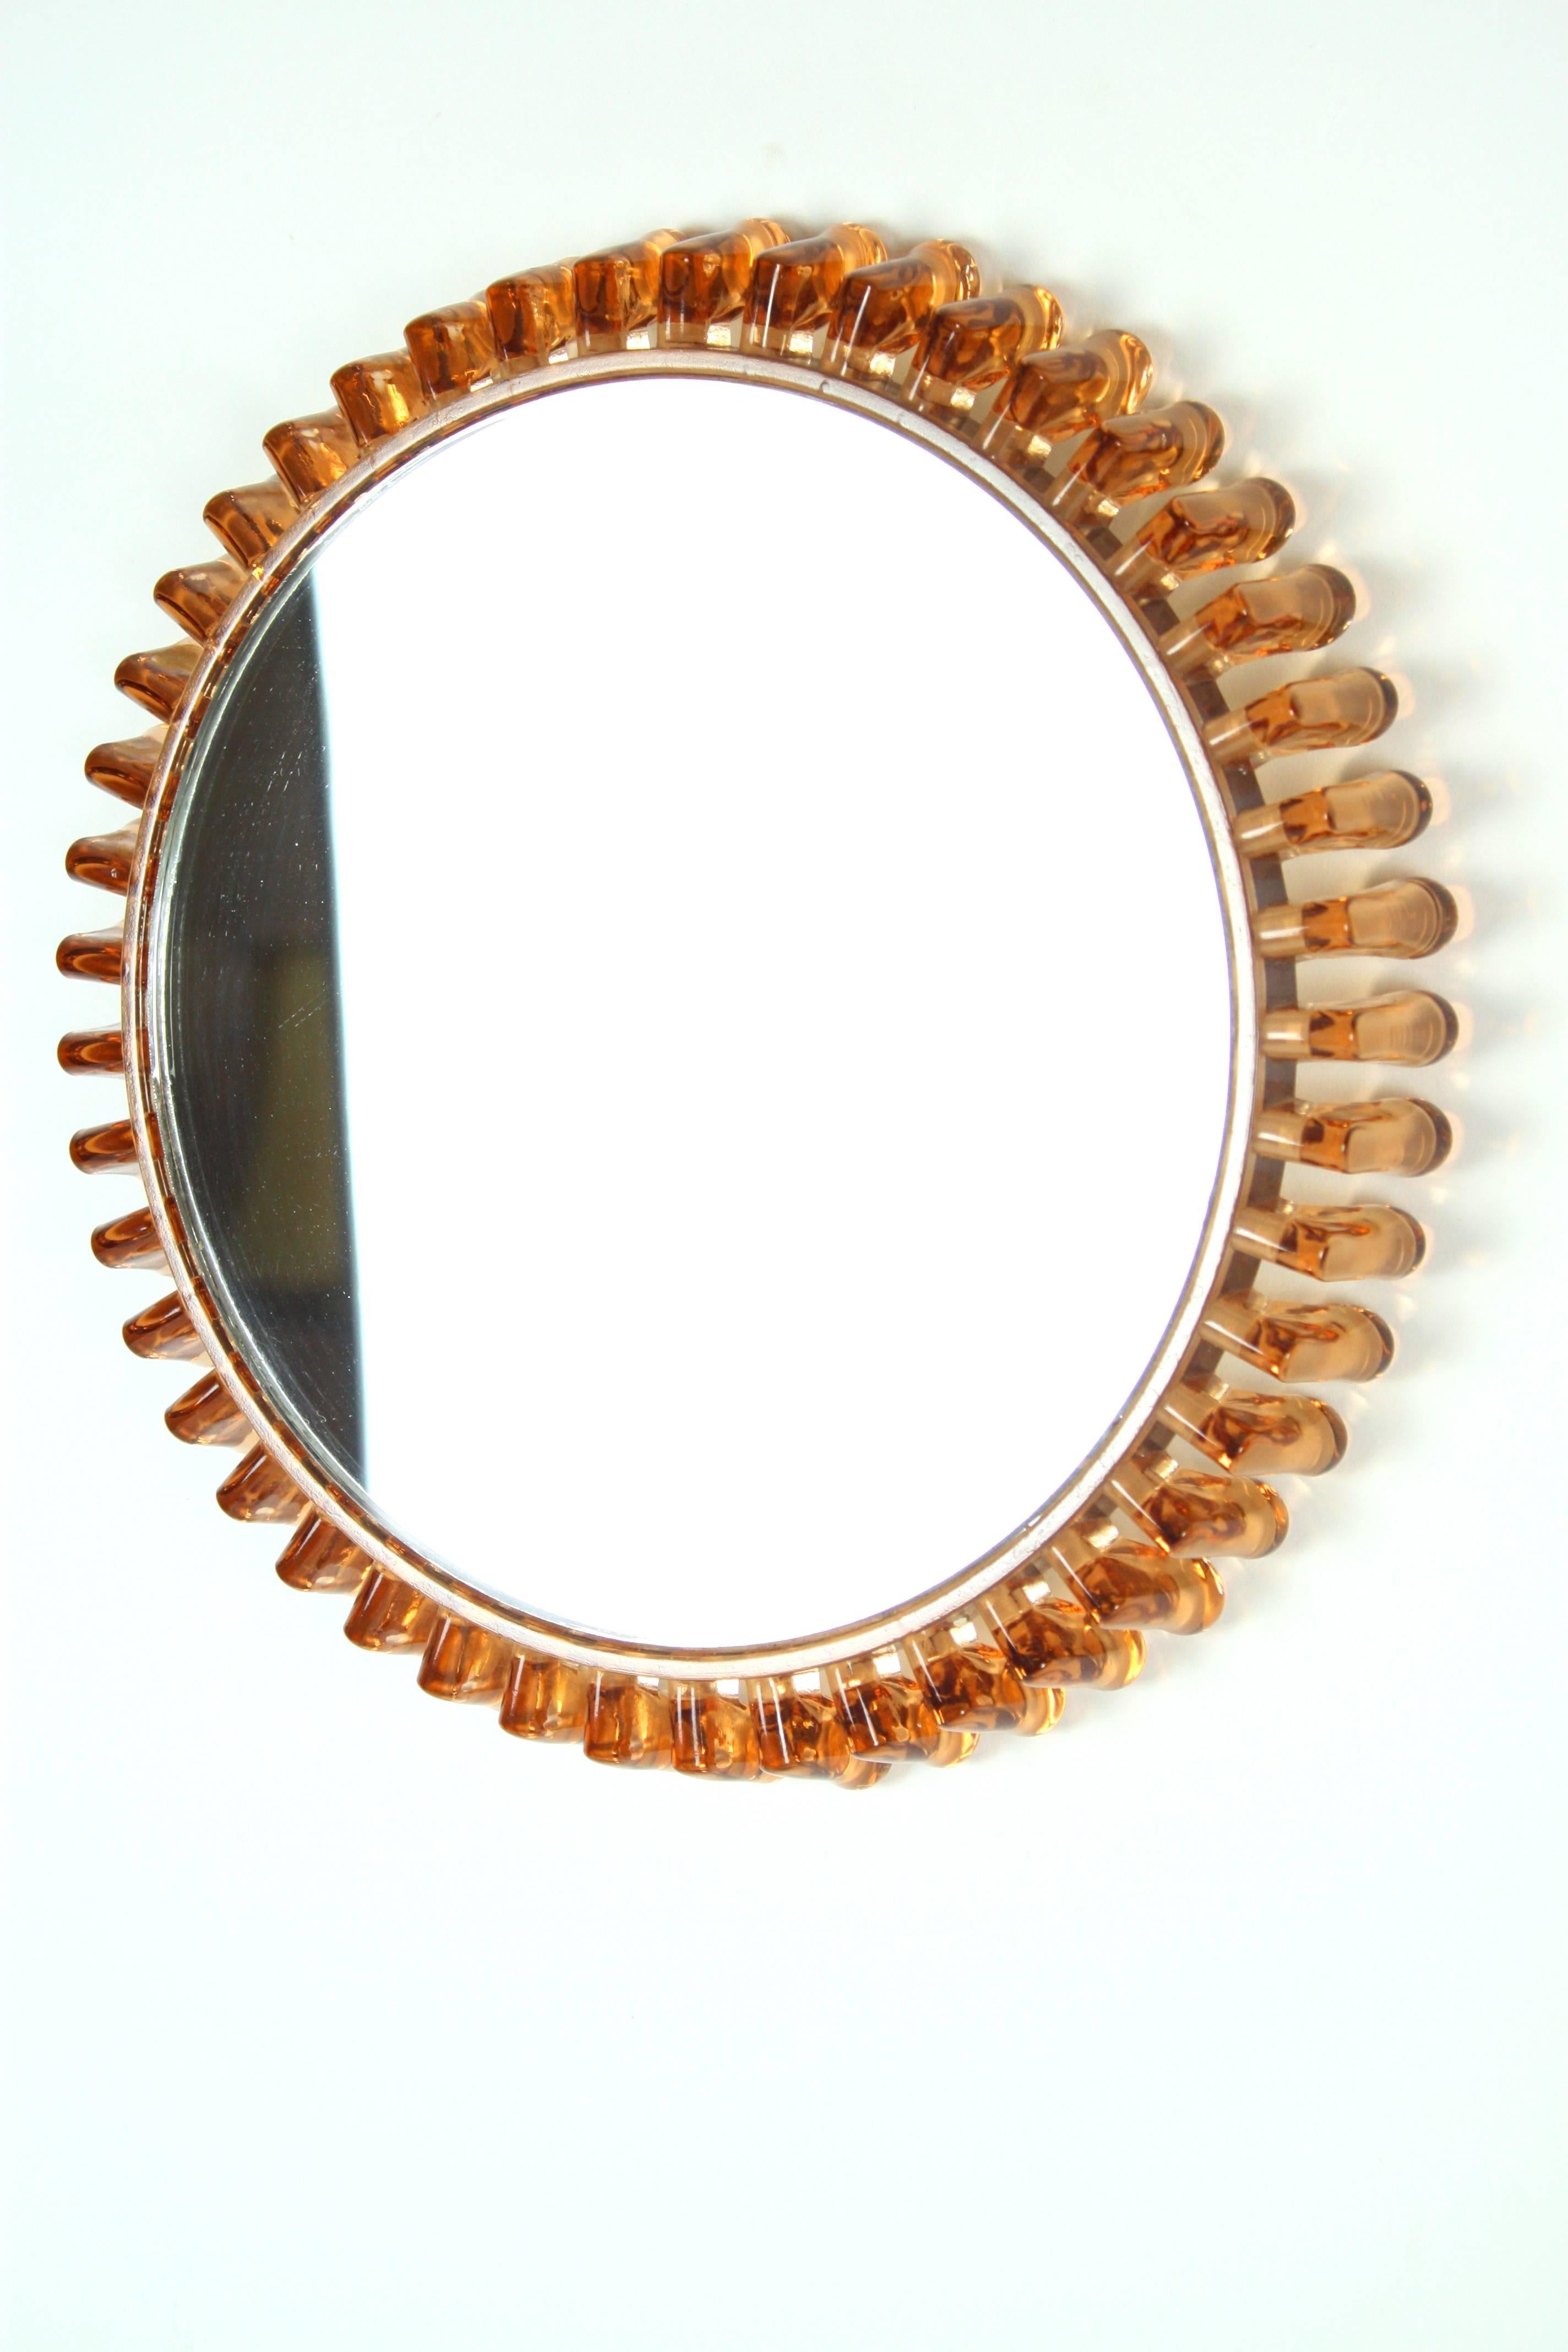 Mid- century modernist circular mirror with amber glass frame in small size.
Italy, 1950s.

Avaliable a big collection of mirrors: Please, kindly check our storefront.